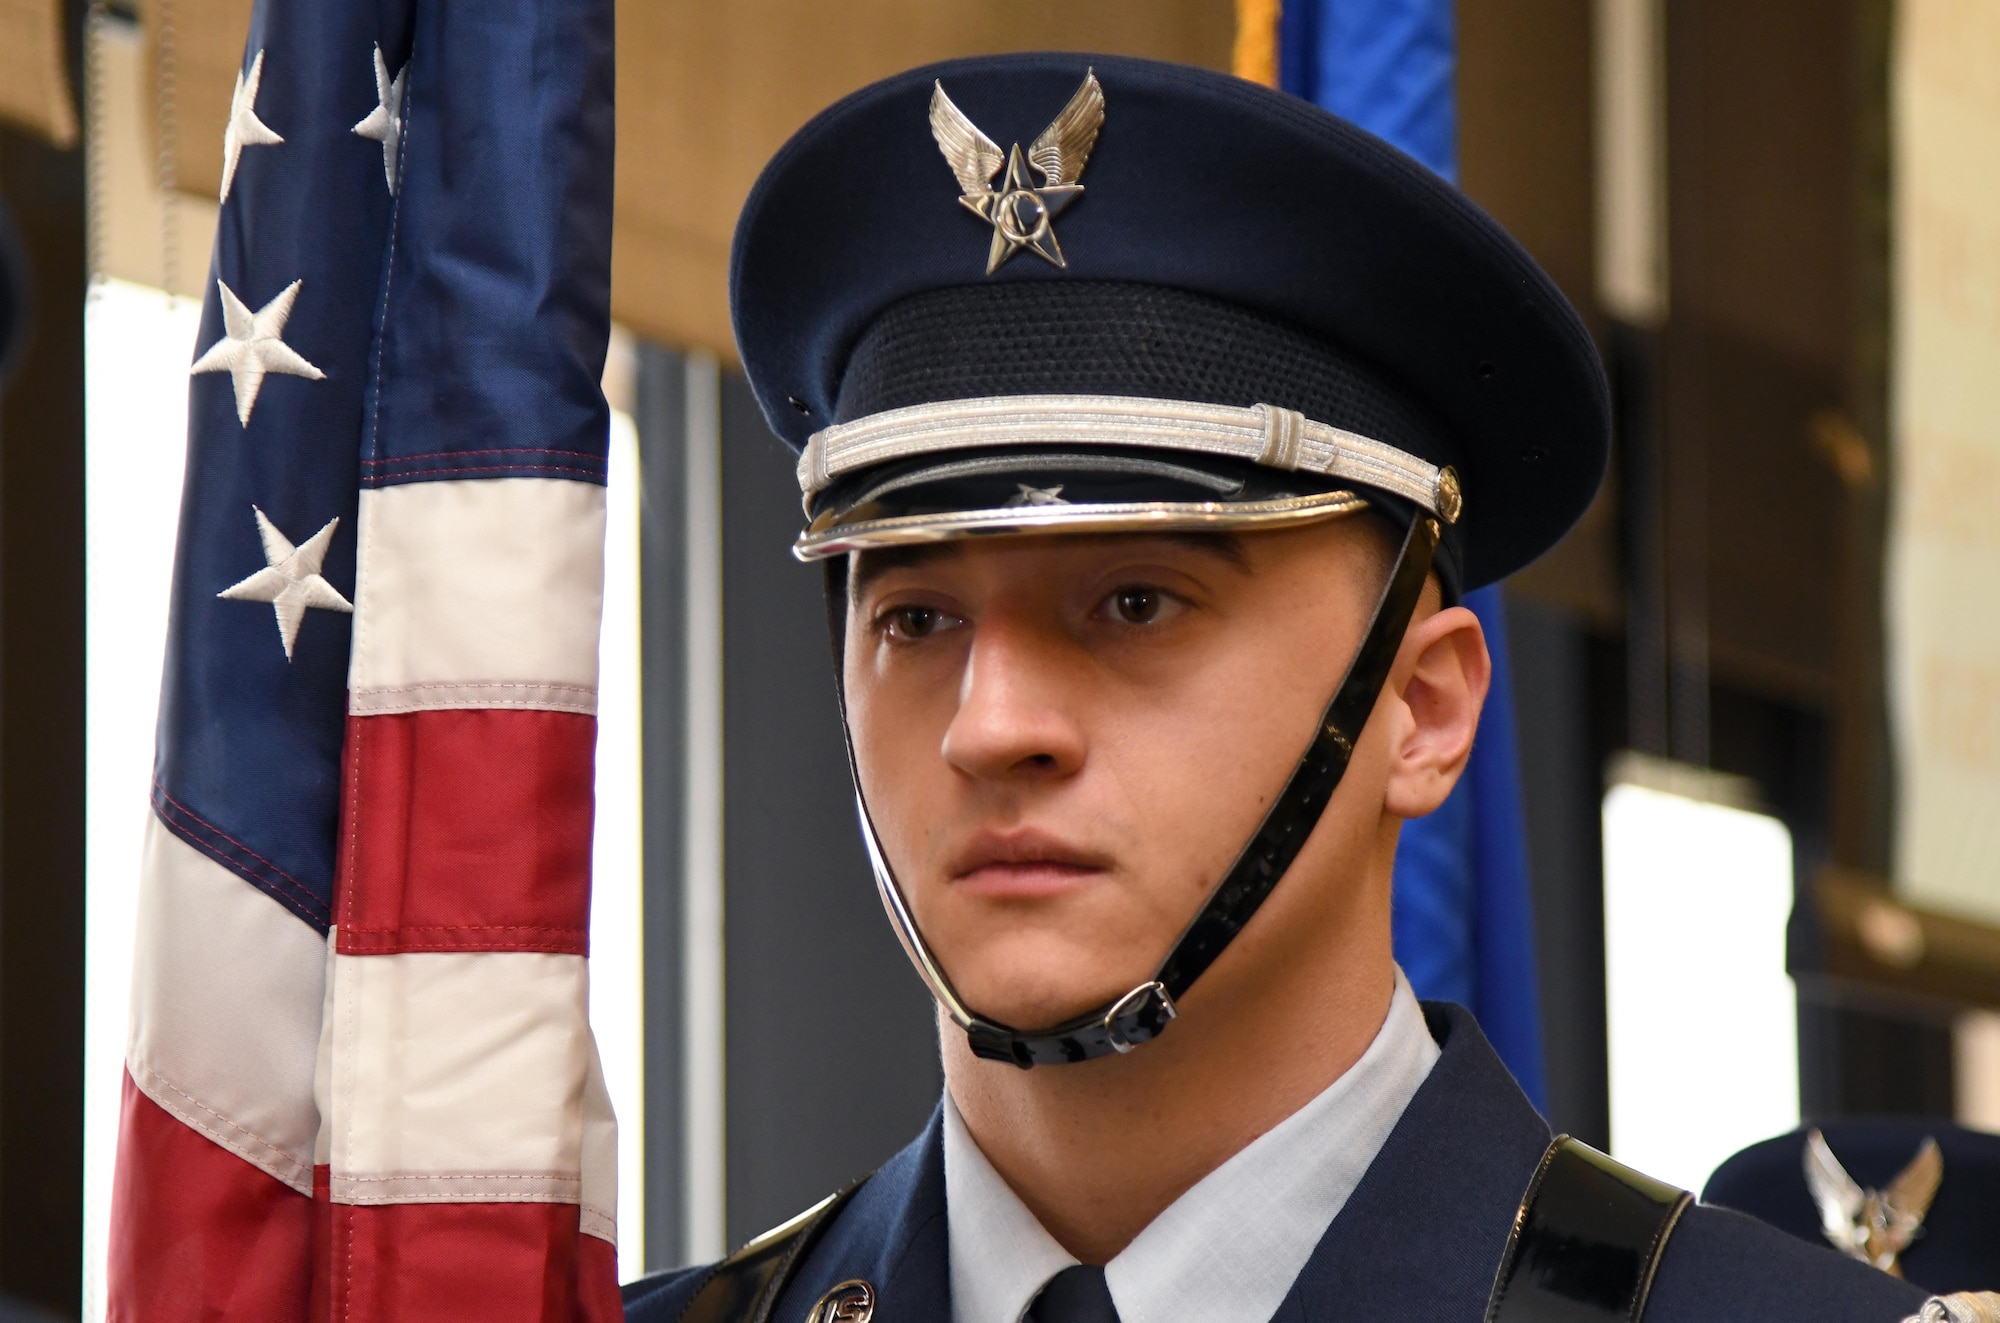 U.S. Air Force Senior Airman Miklo Miller, Keesler Honor Guard member, presents the colors at the annual Dr. Martin Luther King Jr. Memorial Luncheon inside the Bay Breeze Event Center at Keesler Air Force Base, Mississippi, Jan. 15, 2019. The 81st Training Wing and Wing Staff Agencies hosted the event honoring King's legacy and his efforts to inspire civil rights activism within the African-American community. He was only 35 years old when he was awarded the Nobel Peace Prize in 1964. (U.S. Air Force photo by Kemberly Groue)